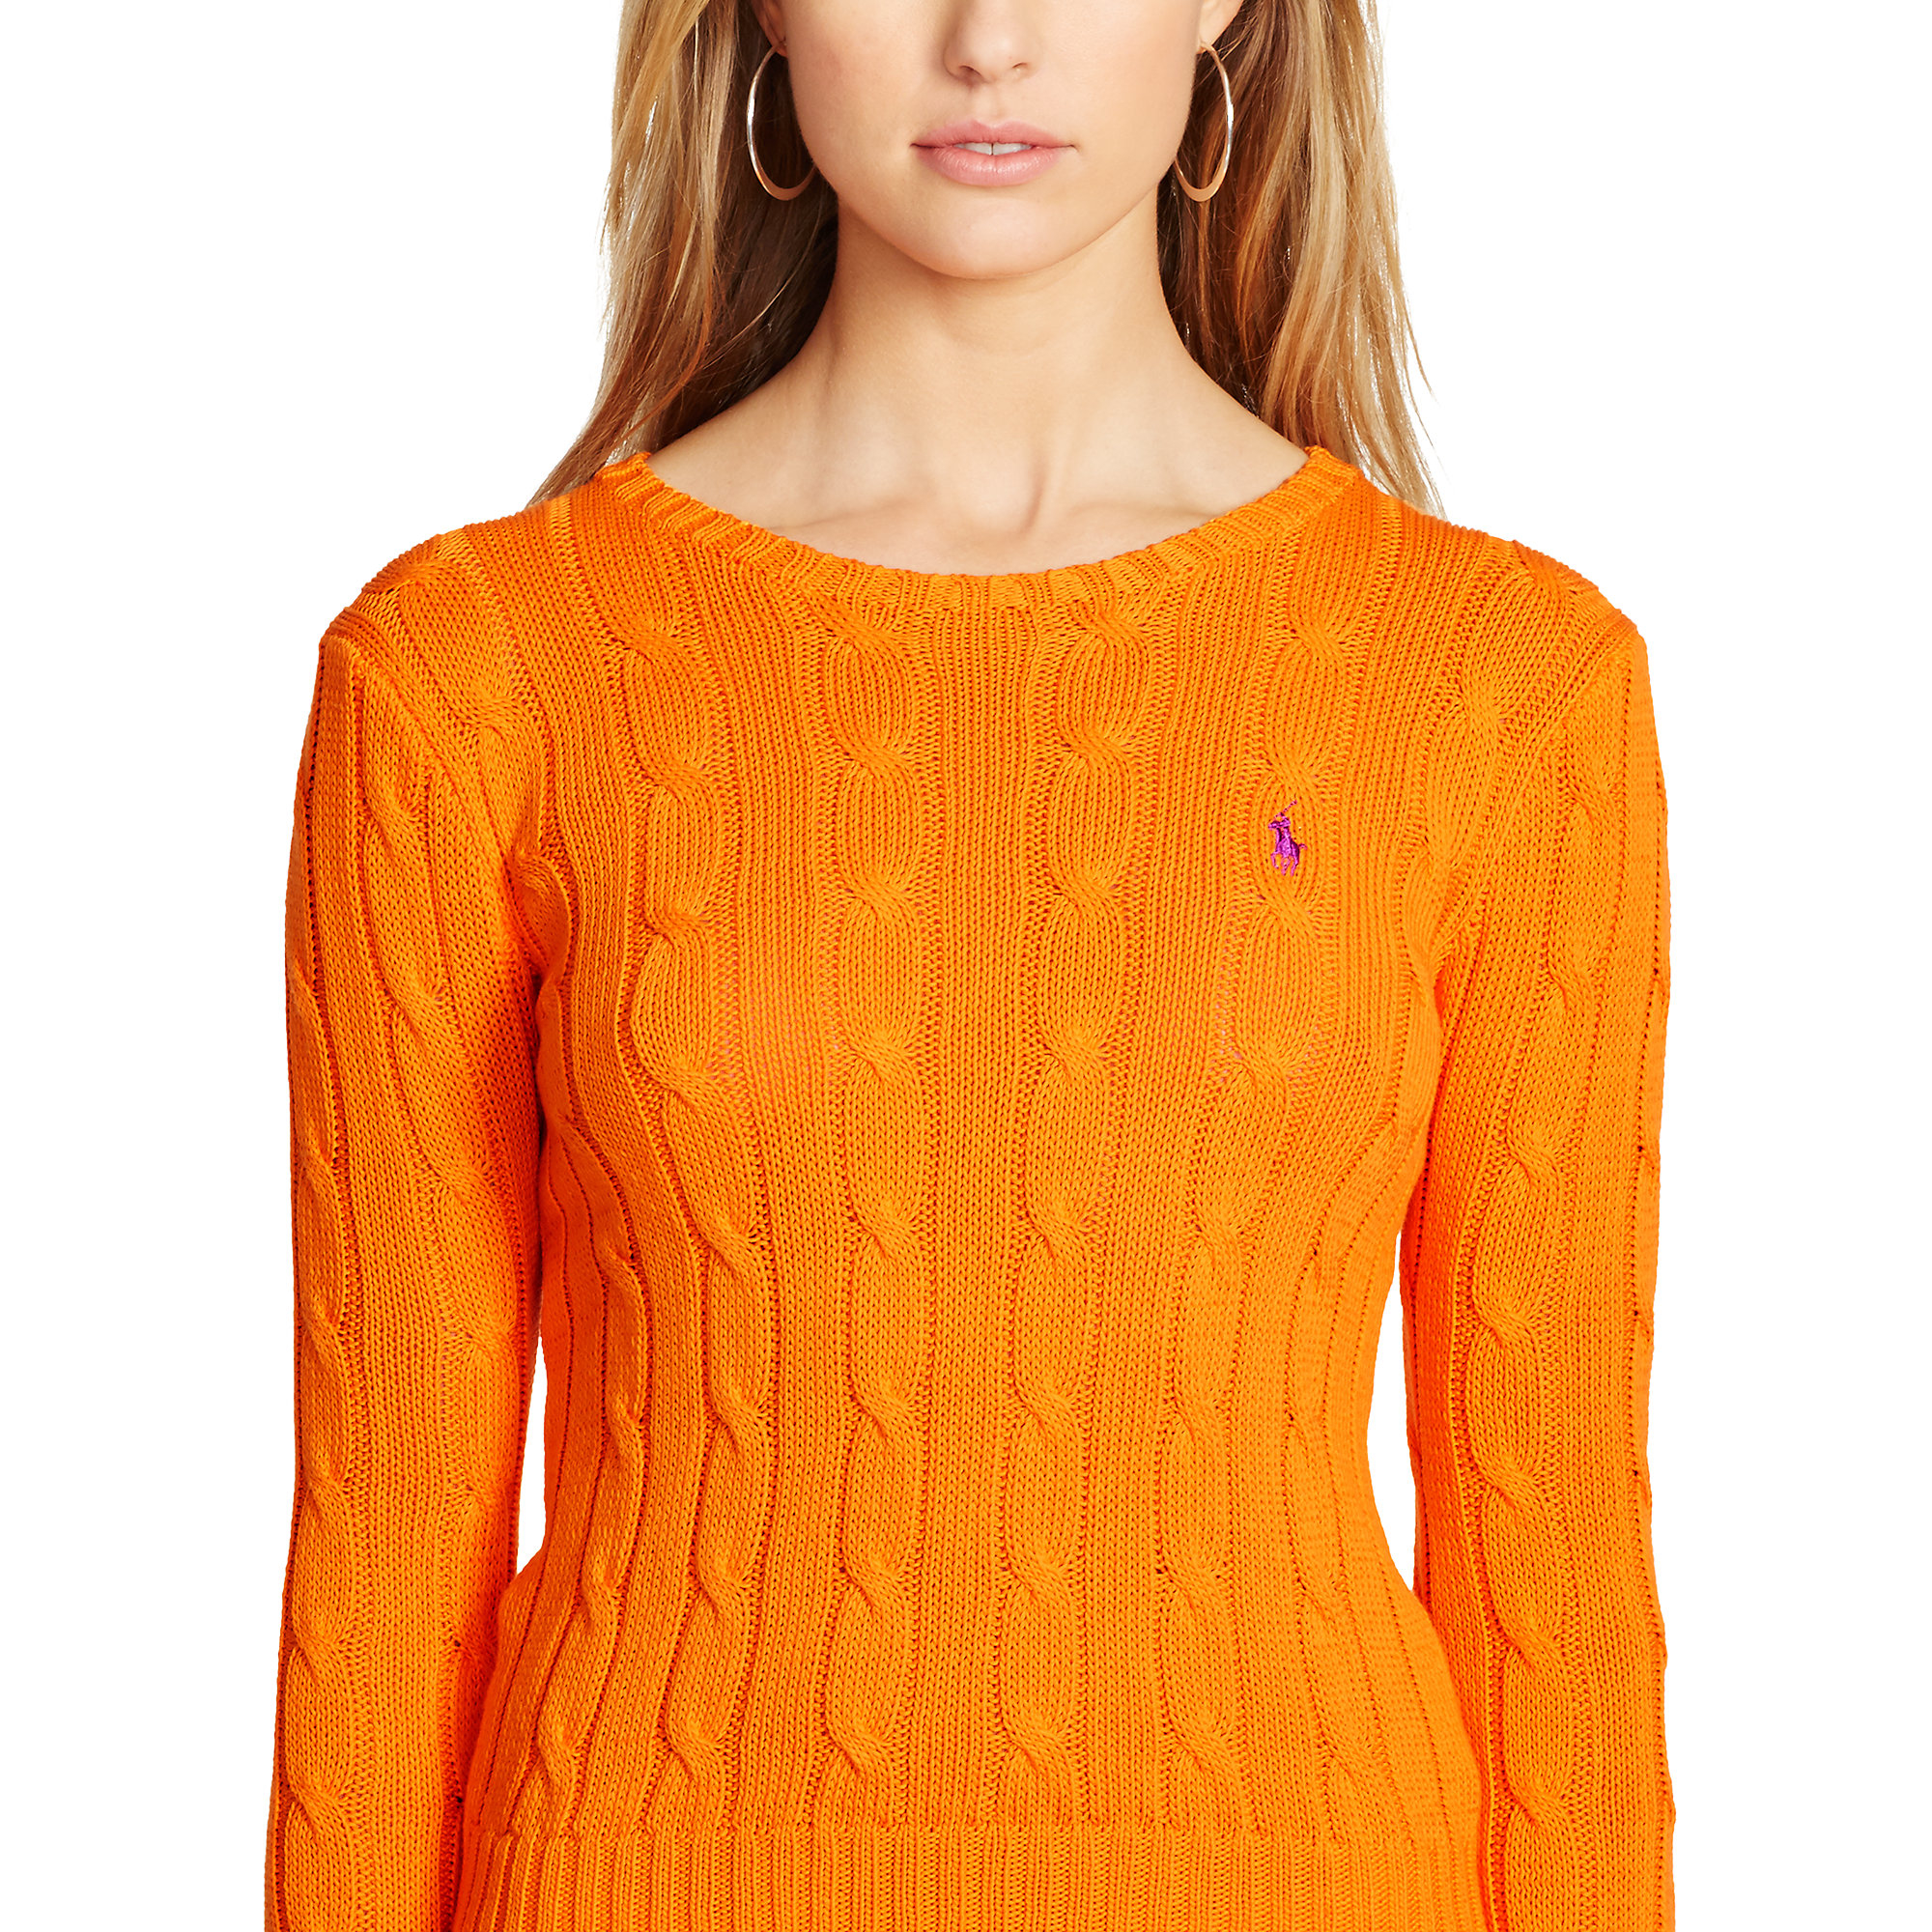 Lyst - Polo Ralph Lauren Cable-knit Cotton Sweater in Orange